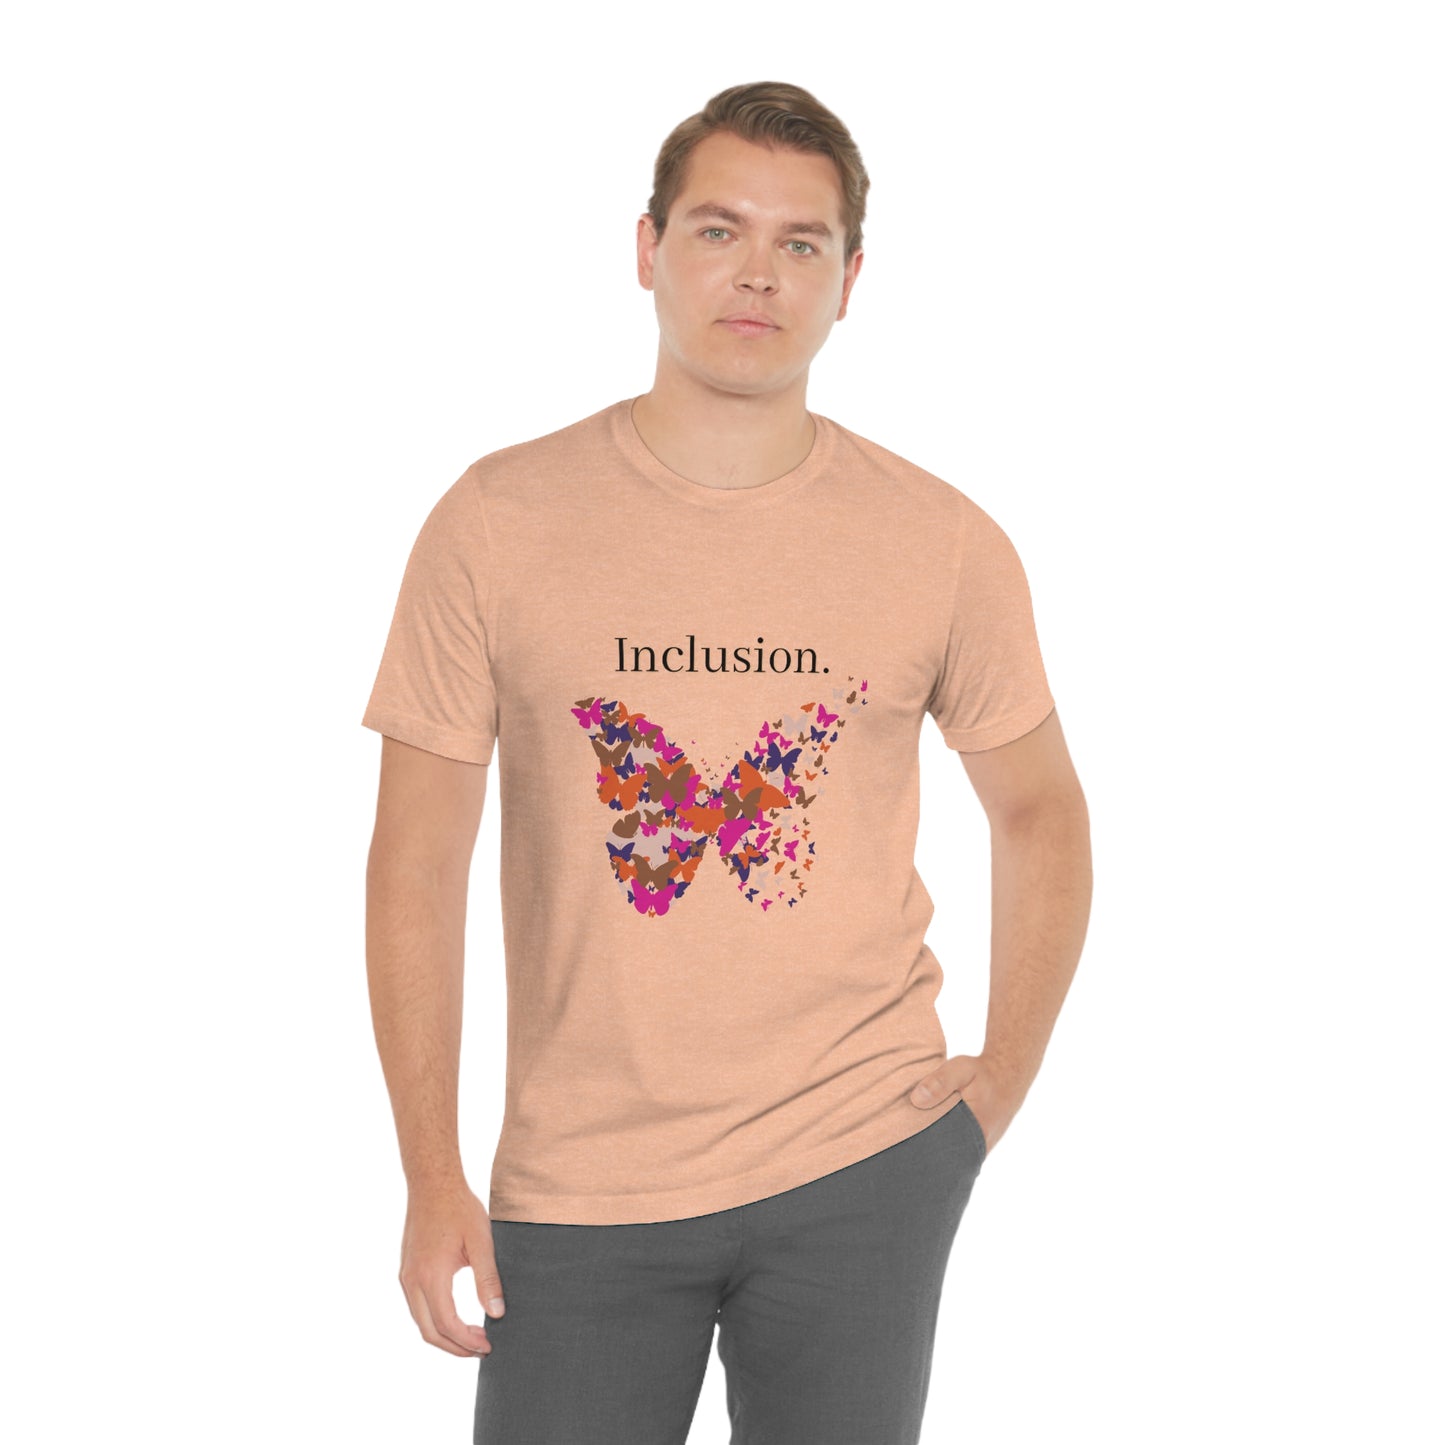 Inclusion Shirt Butterflies Purple, Diversity Inclusion Tshirts, DEIB Statement Tees, Inclusion is an Act Tees